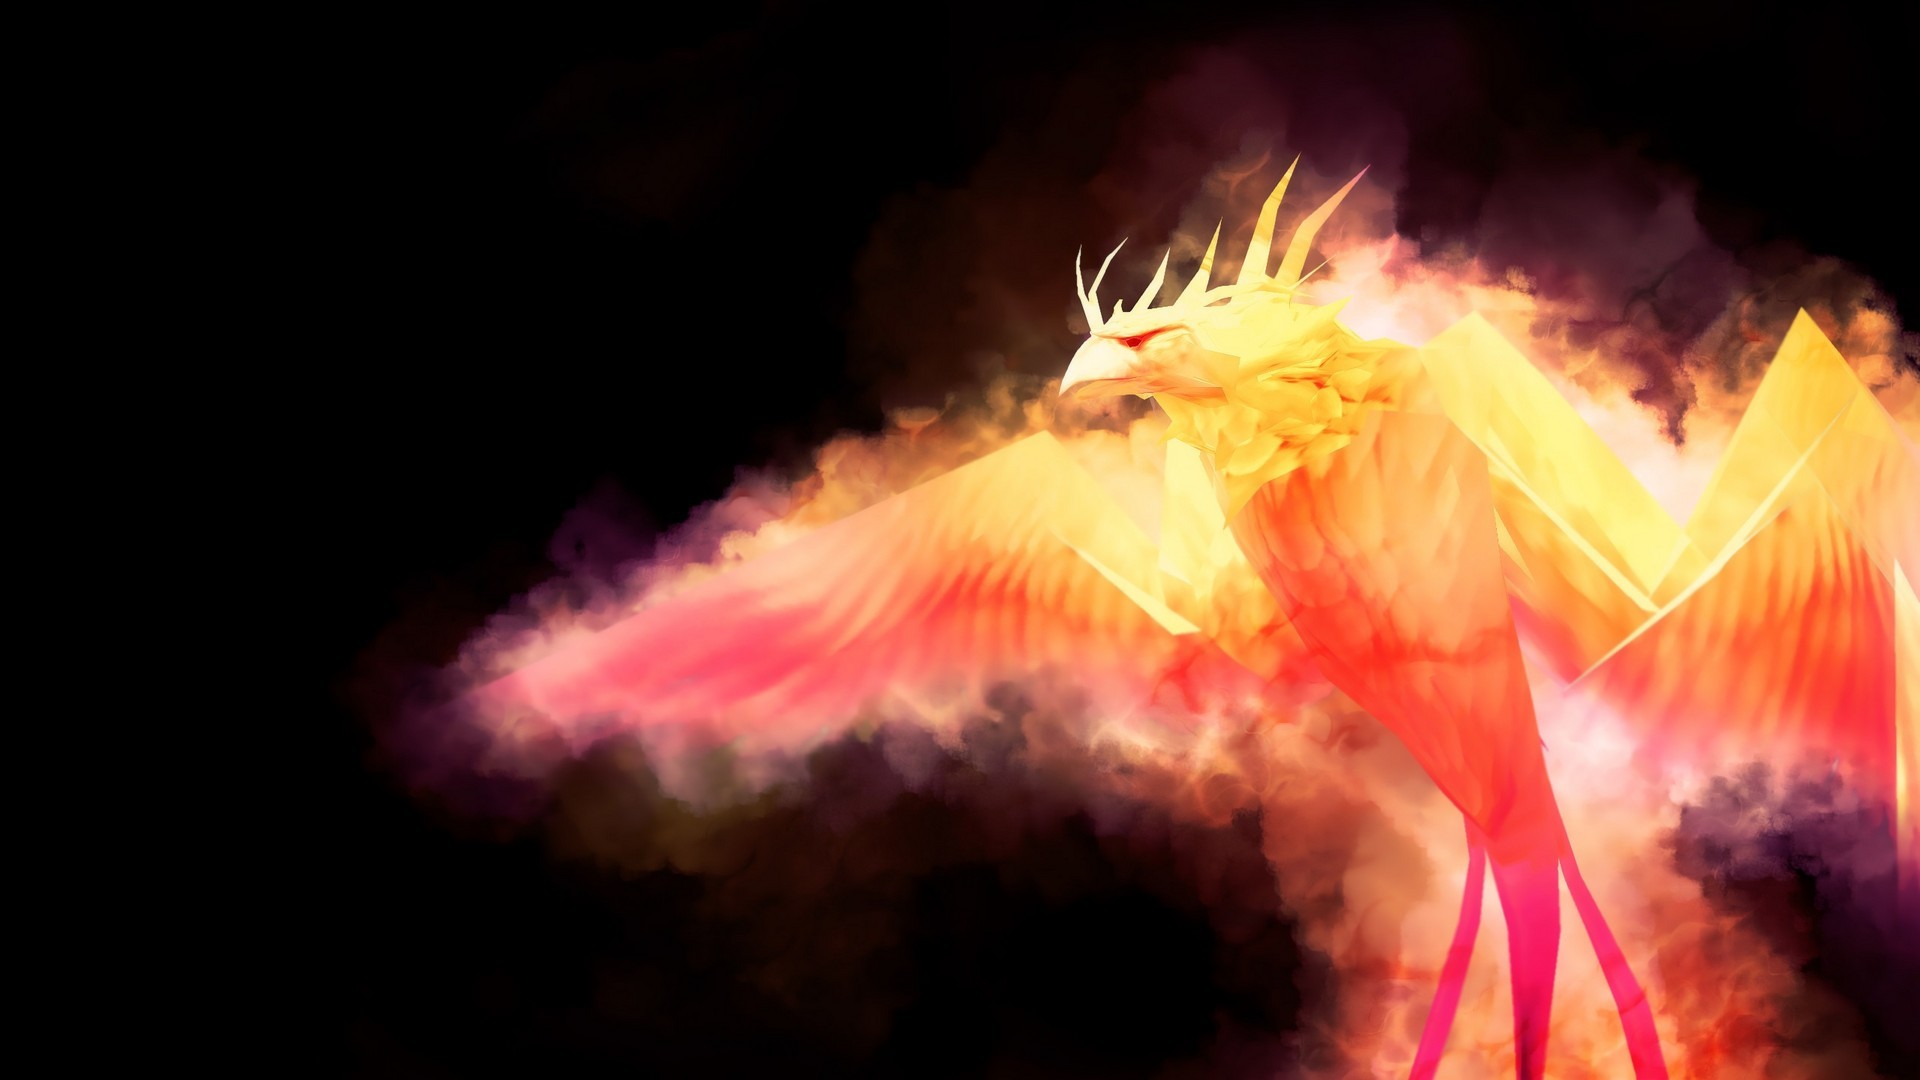 1920x1080 Phoenix Bird Images Wallpaper HD with image resolution  pixel. You  can make this wallpaper